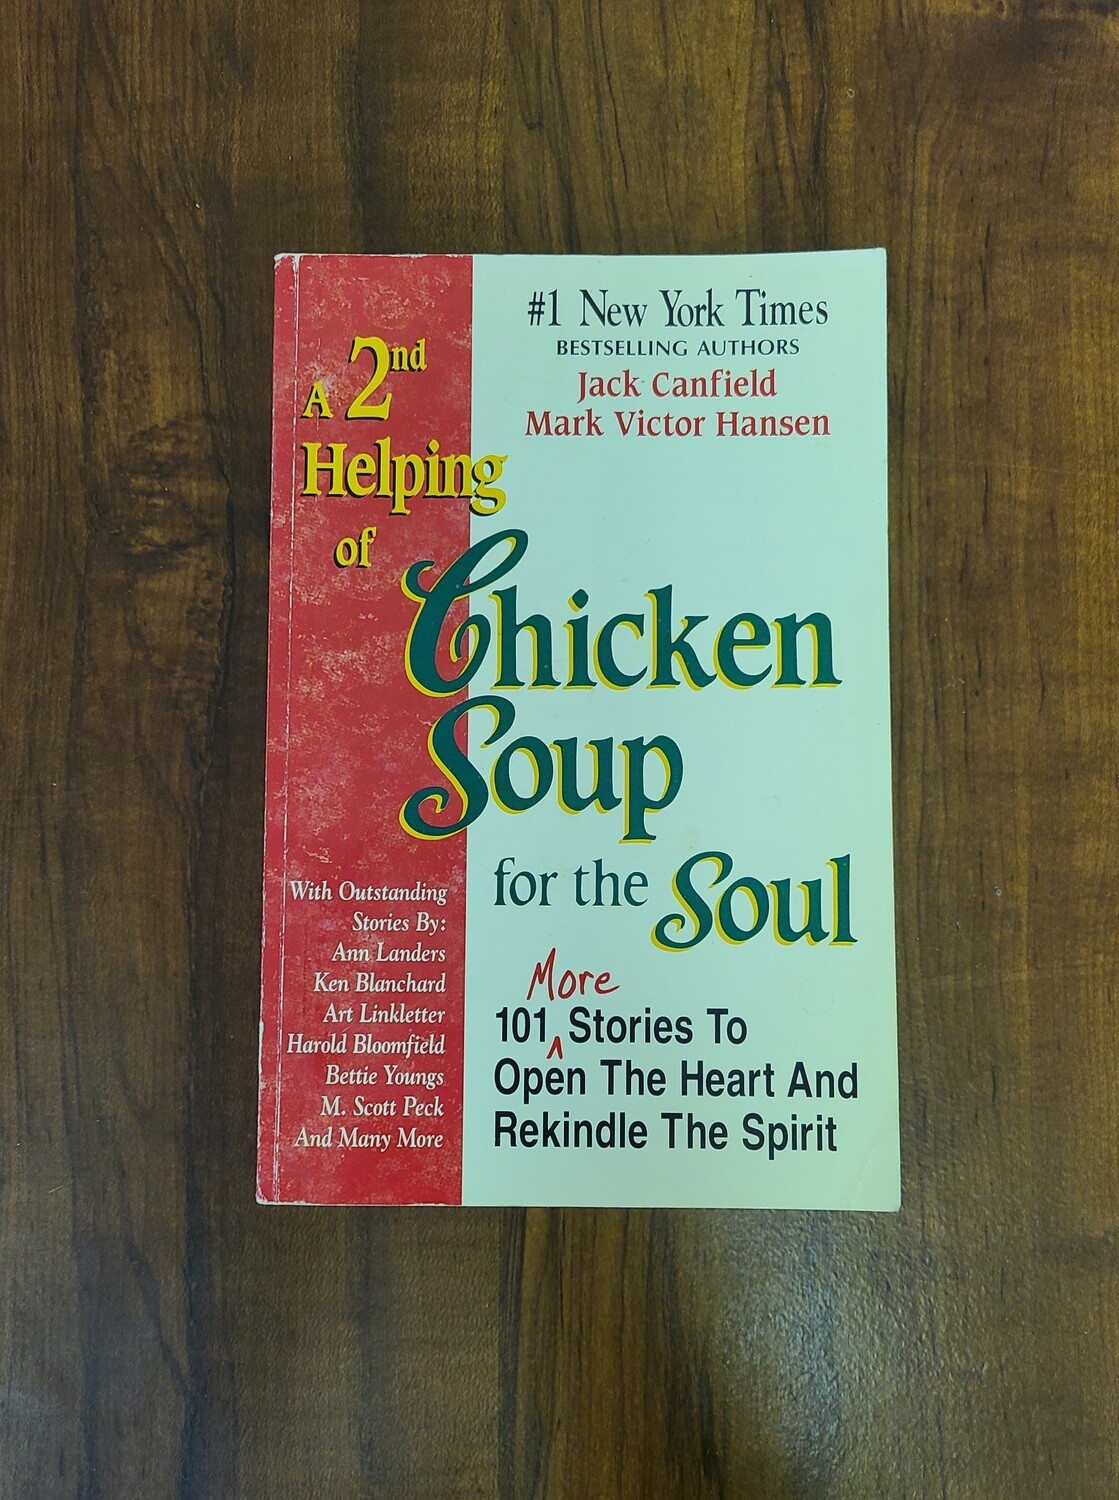 A 2nd Helping of Chicken Soup for the Soul by Jack Canfield and Mark Victor Hansen - Paperback